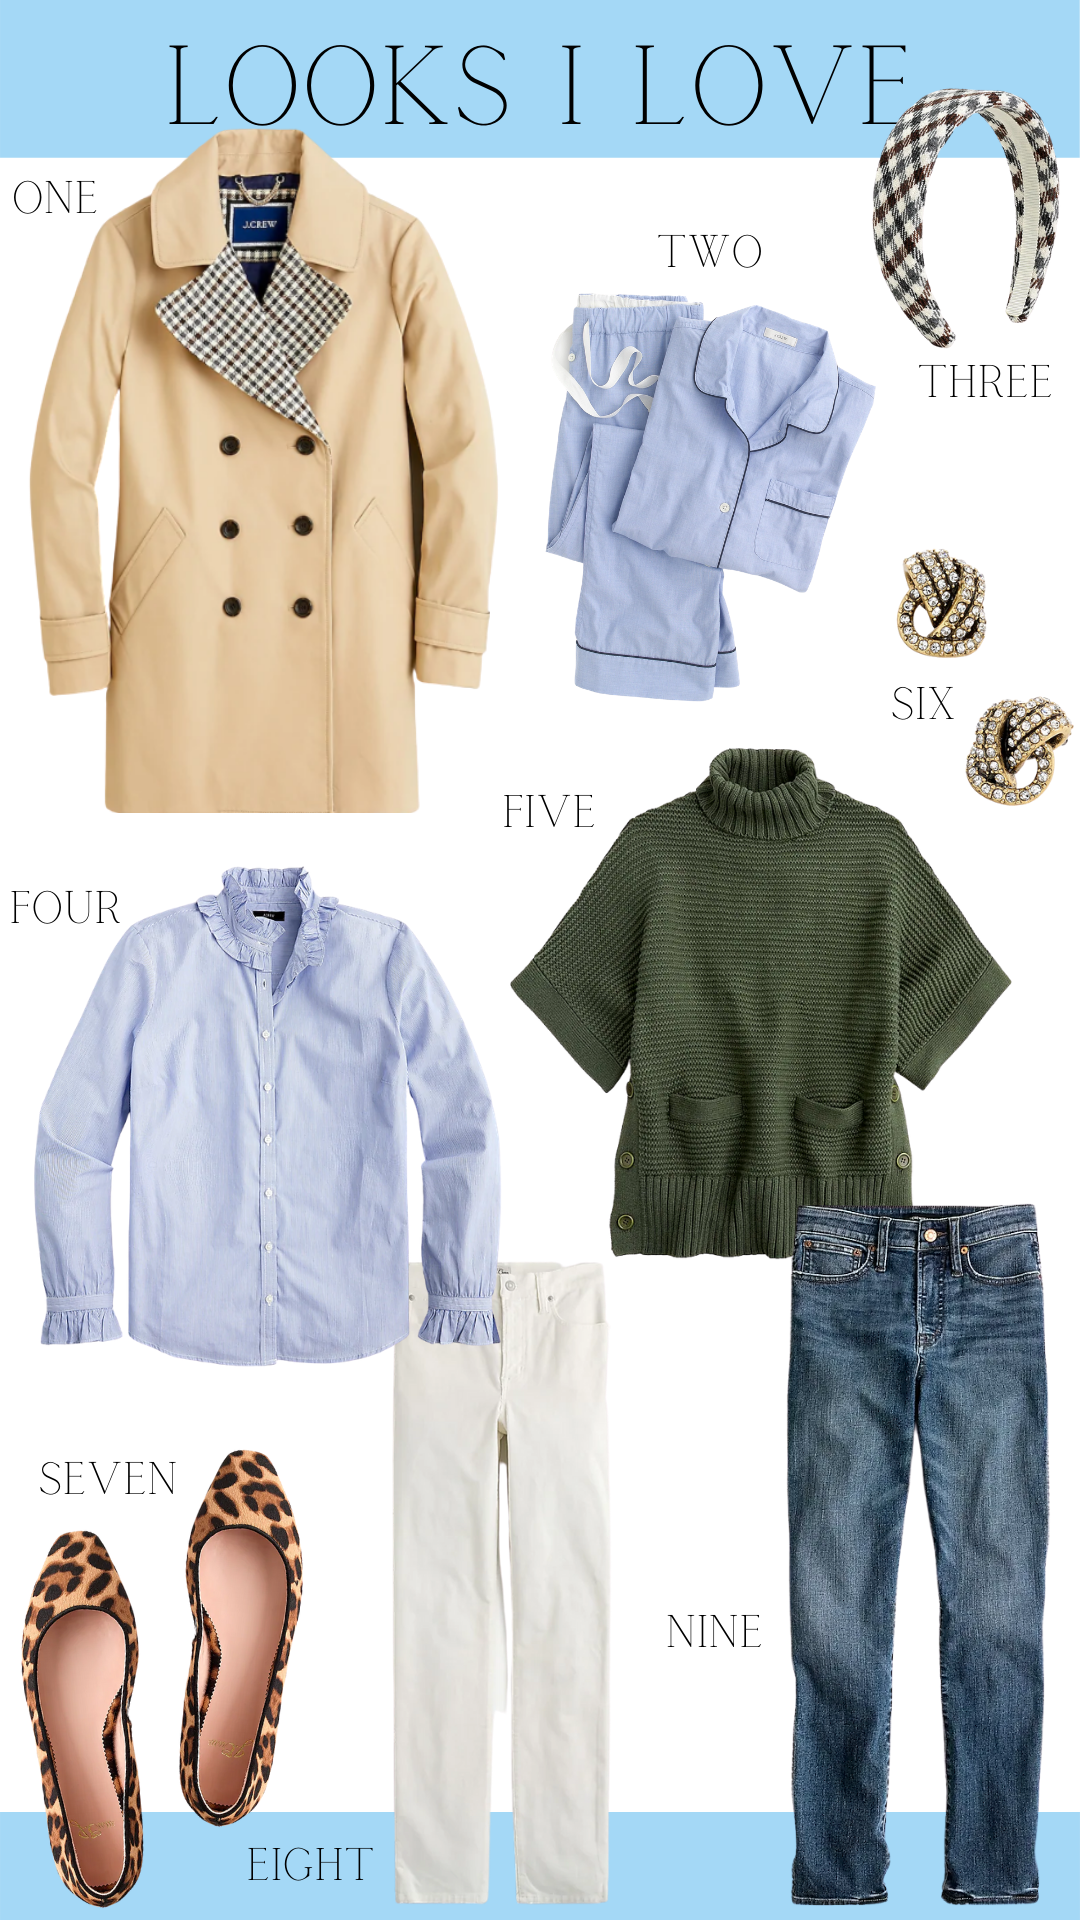 CARLY J. CREW FACTORY PREPPY FALL FINDS